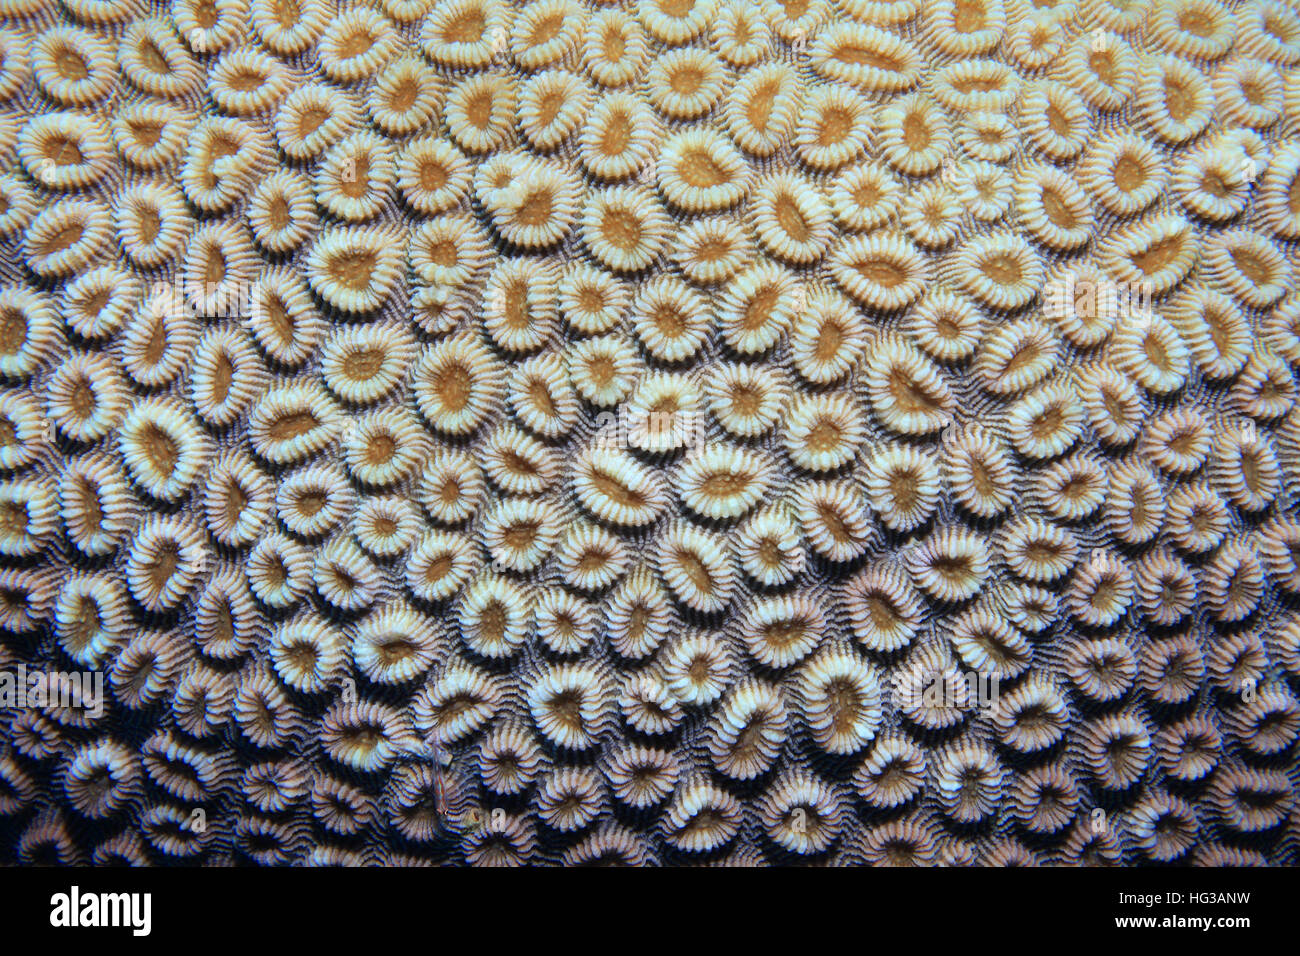 Brain coral (Favia favus) underwater in the coral reef Stock Photo